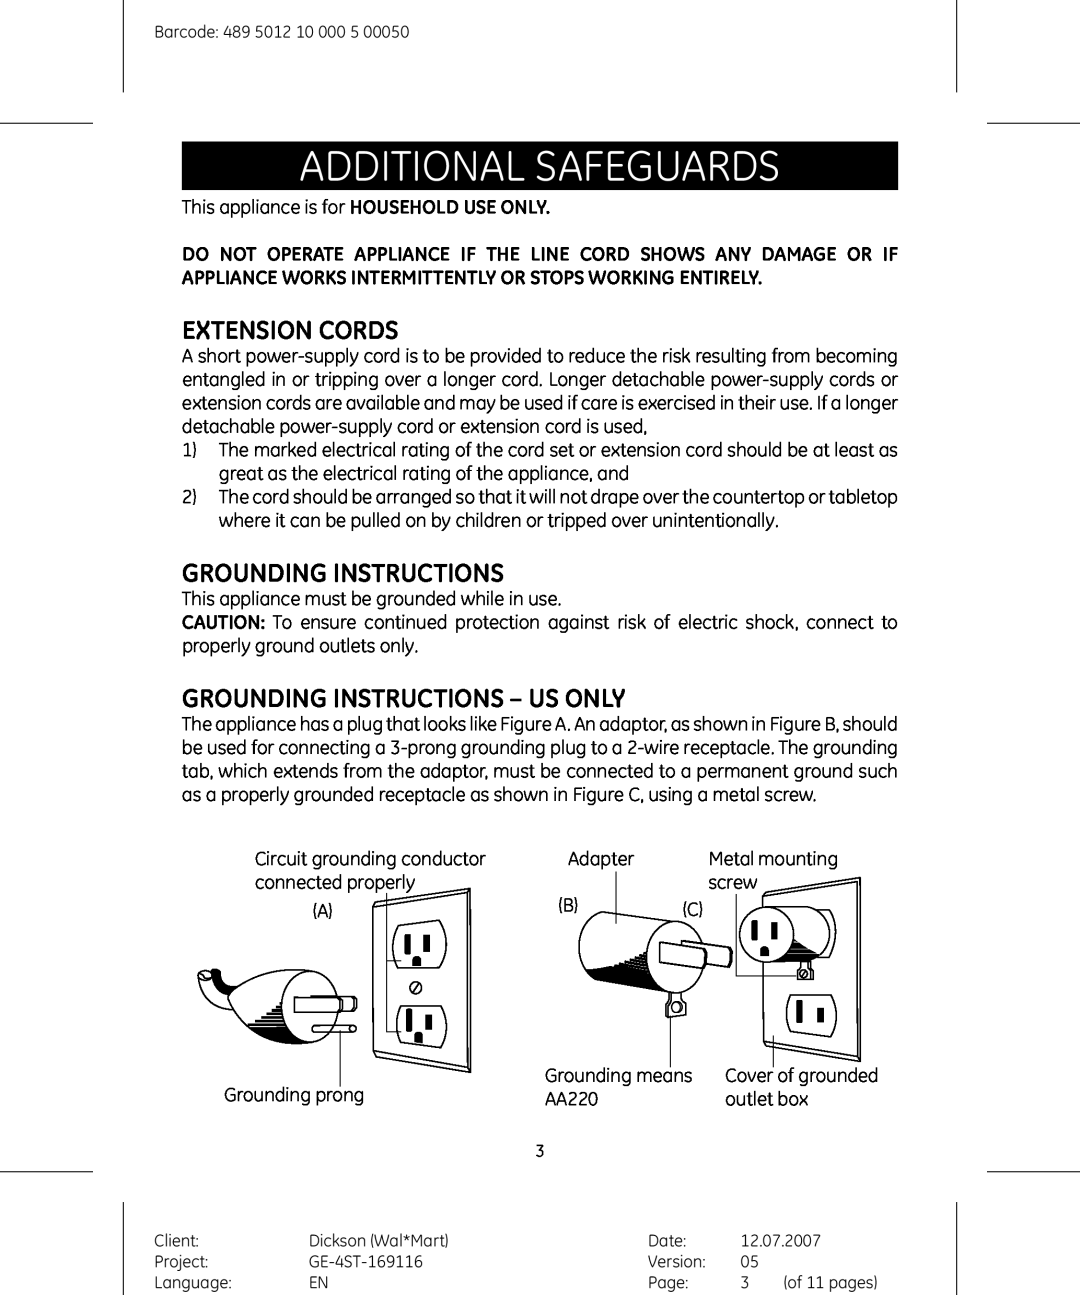 GE 681131691154 manual Additional Safeguards, Extension Cords, Grounding Instructions - Us Only 